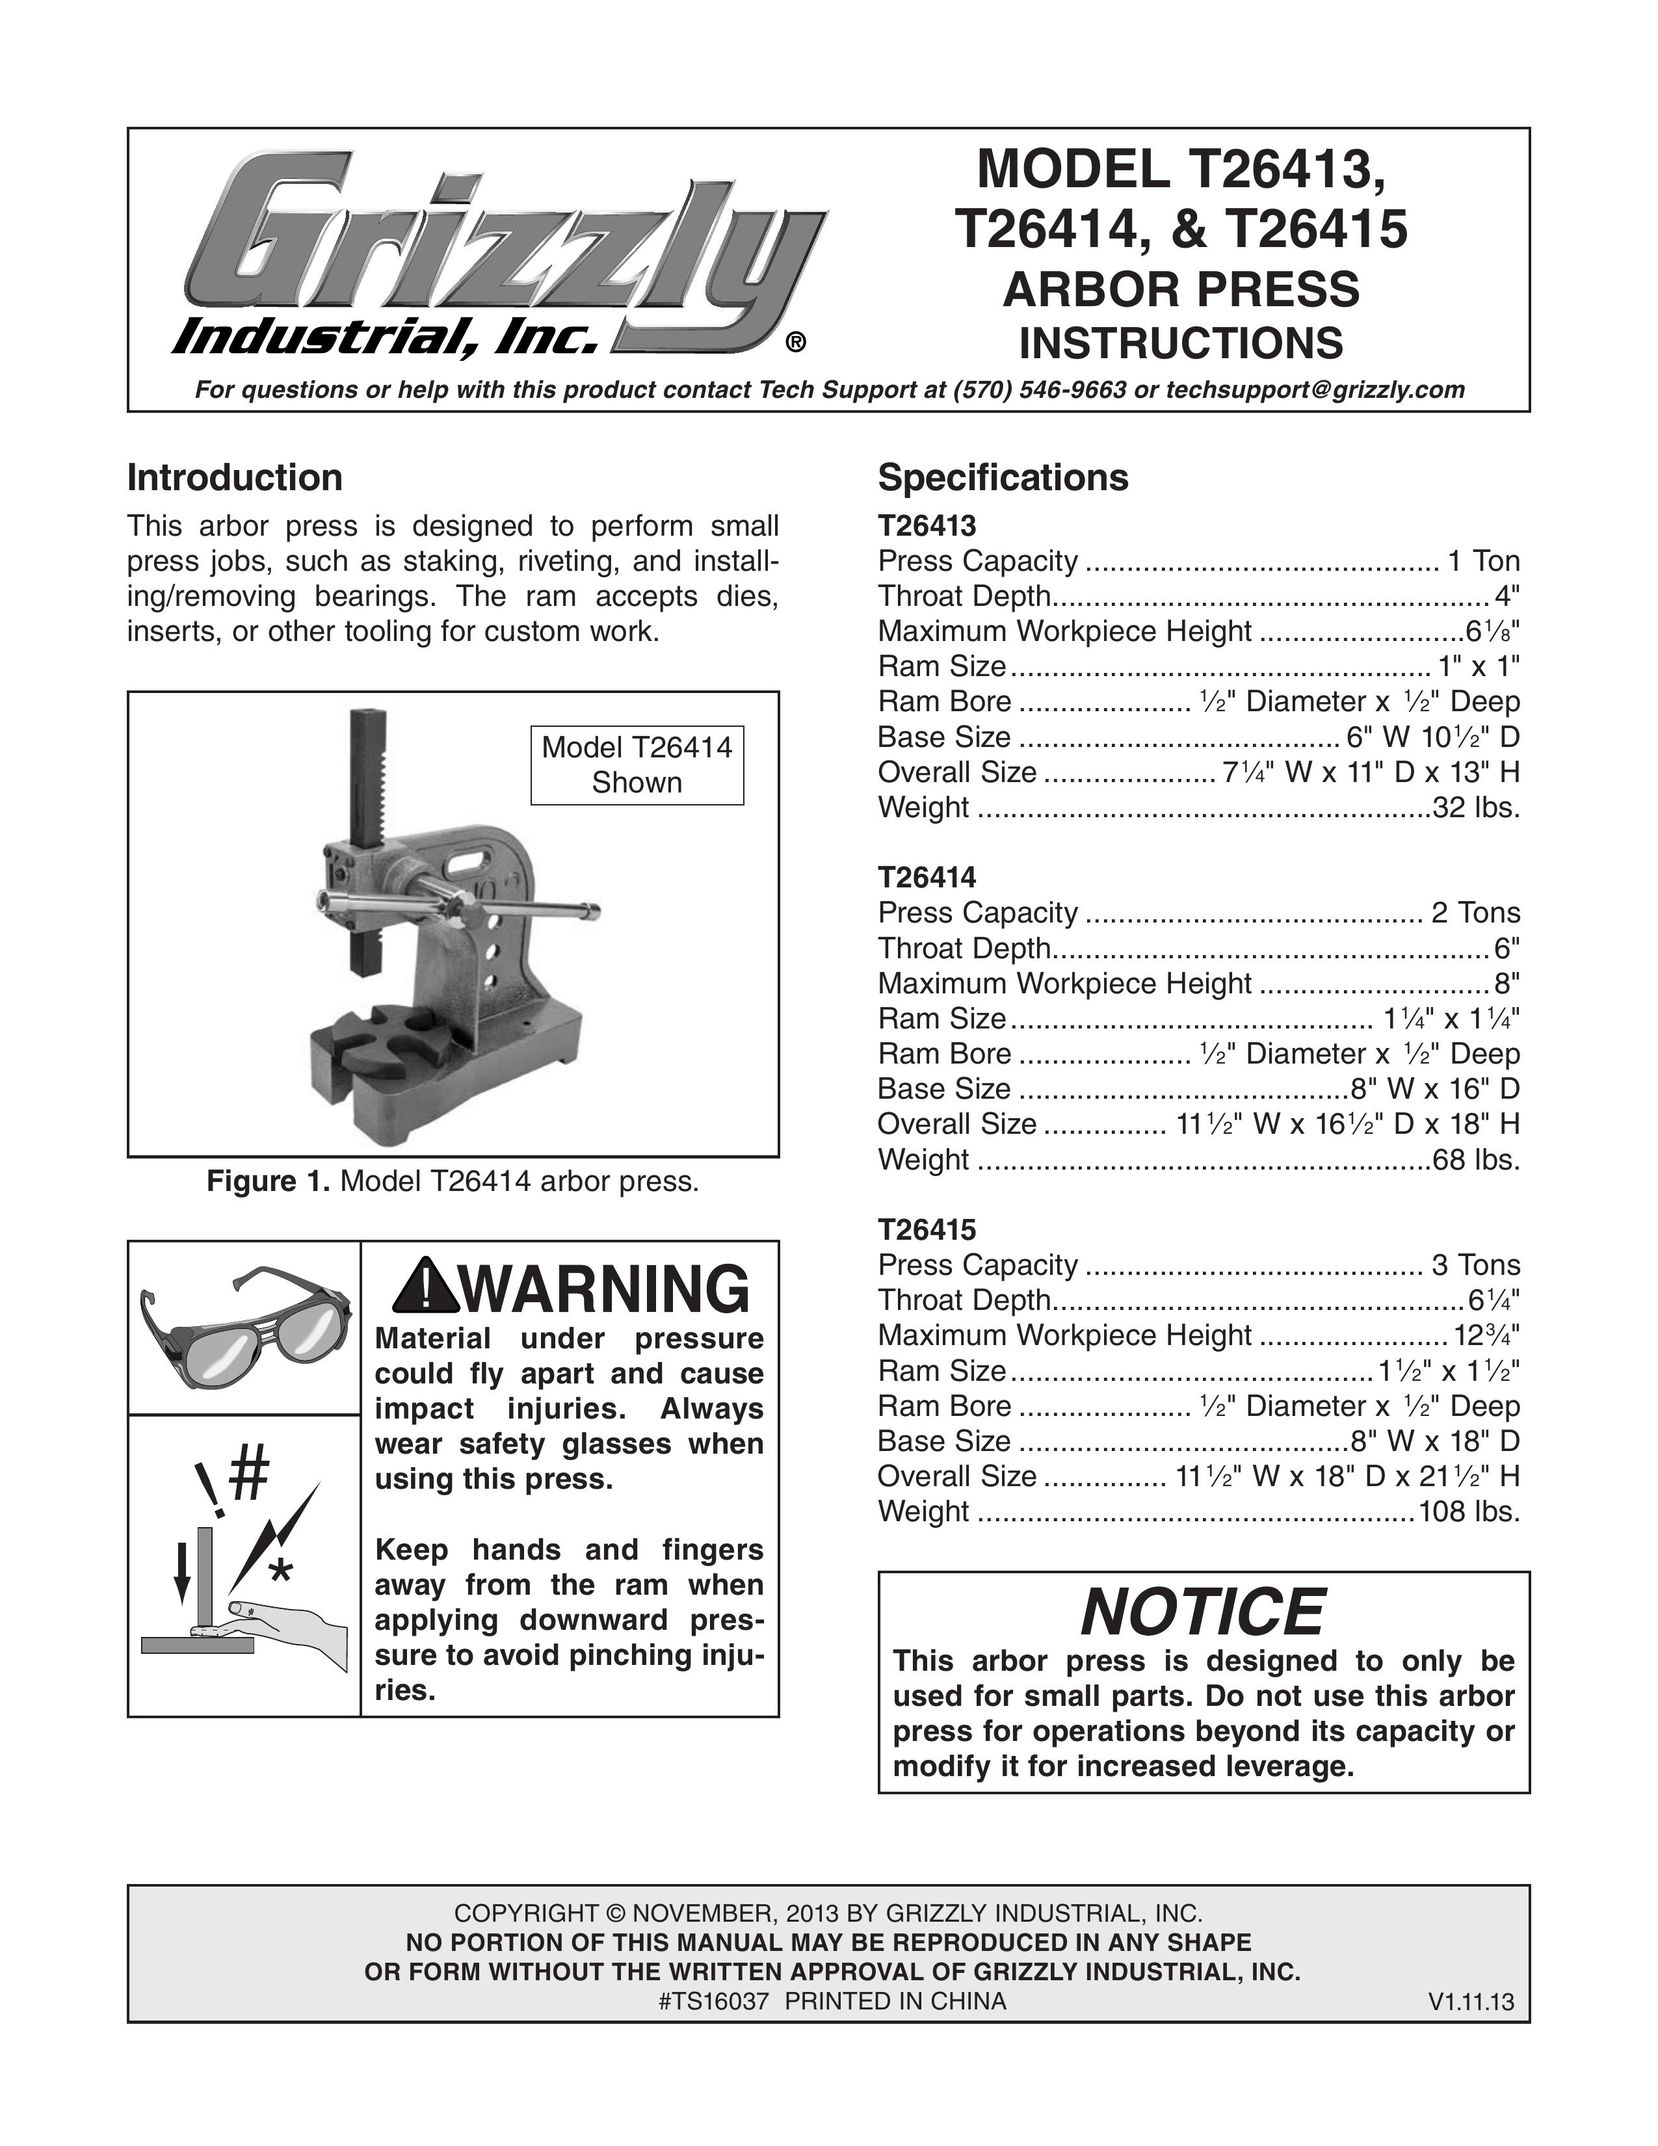 Grizzly T26415 Doll User Manual